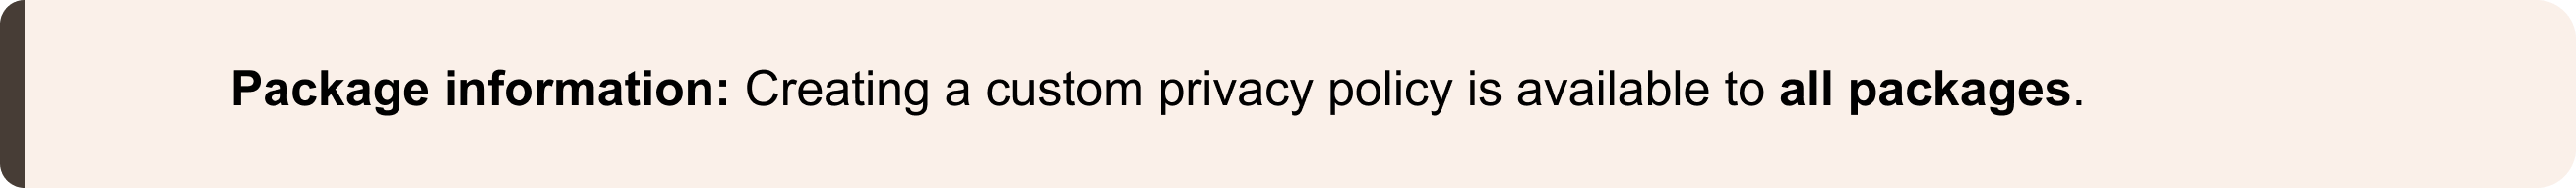 Custom_privacy_policy_1.png